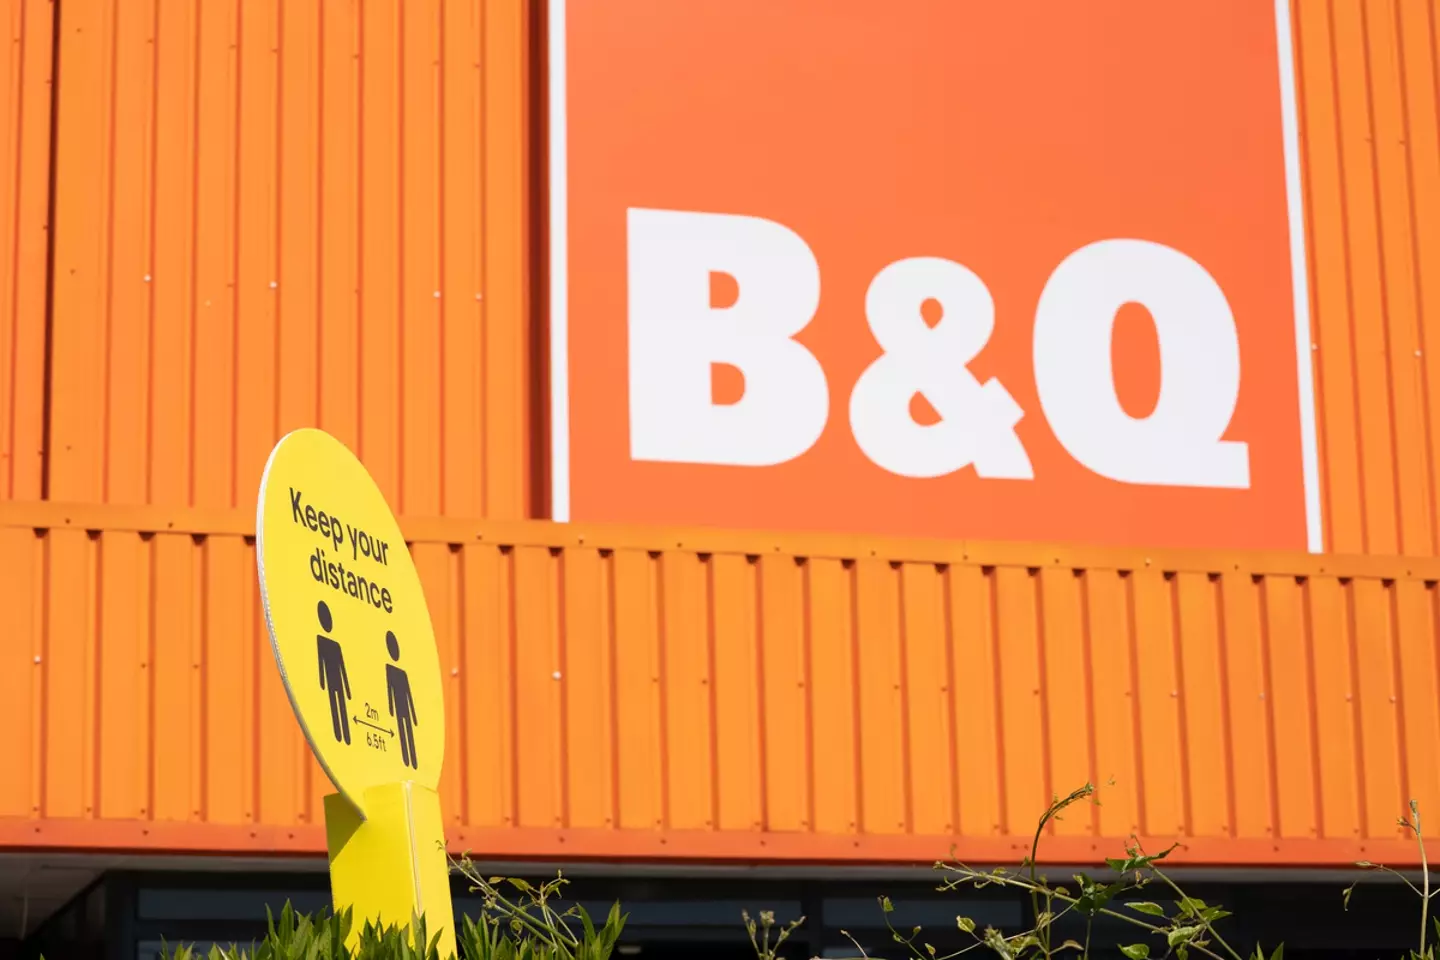 The woman's theft spree was foiled by a B&Q shop.